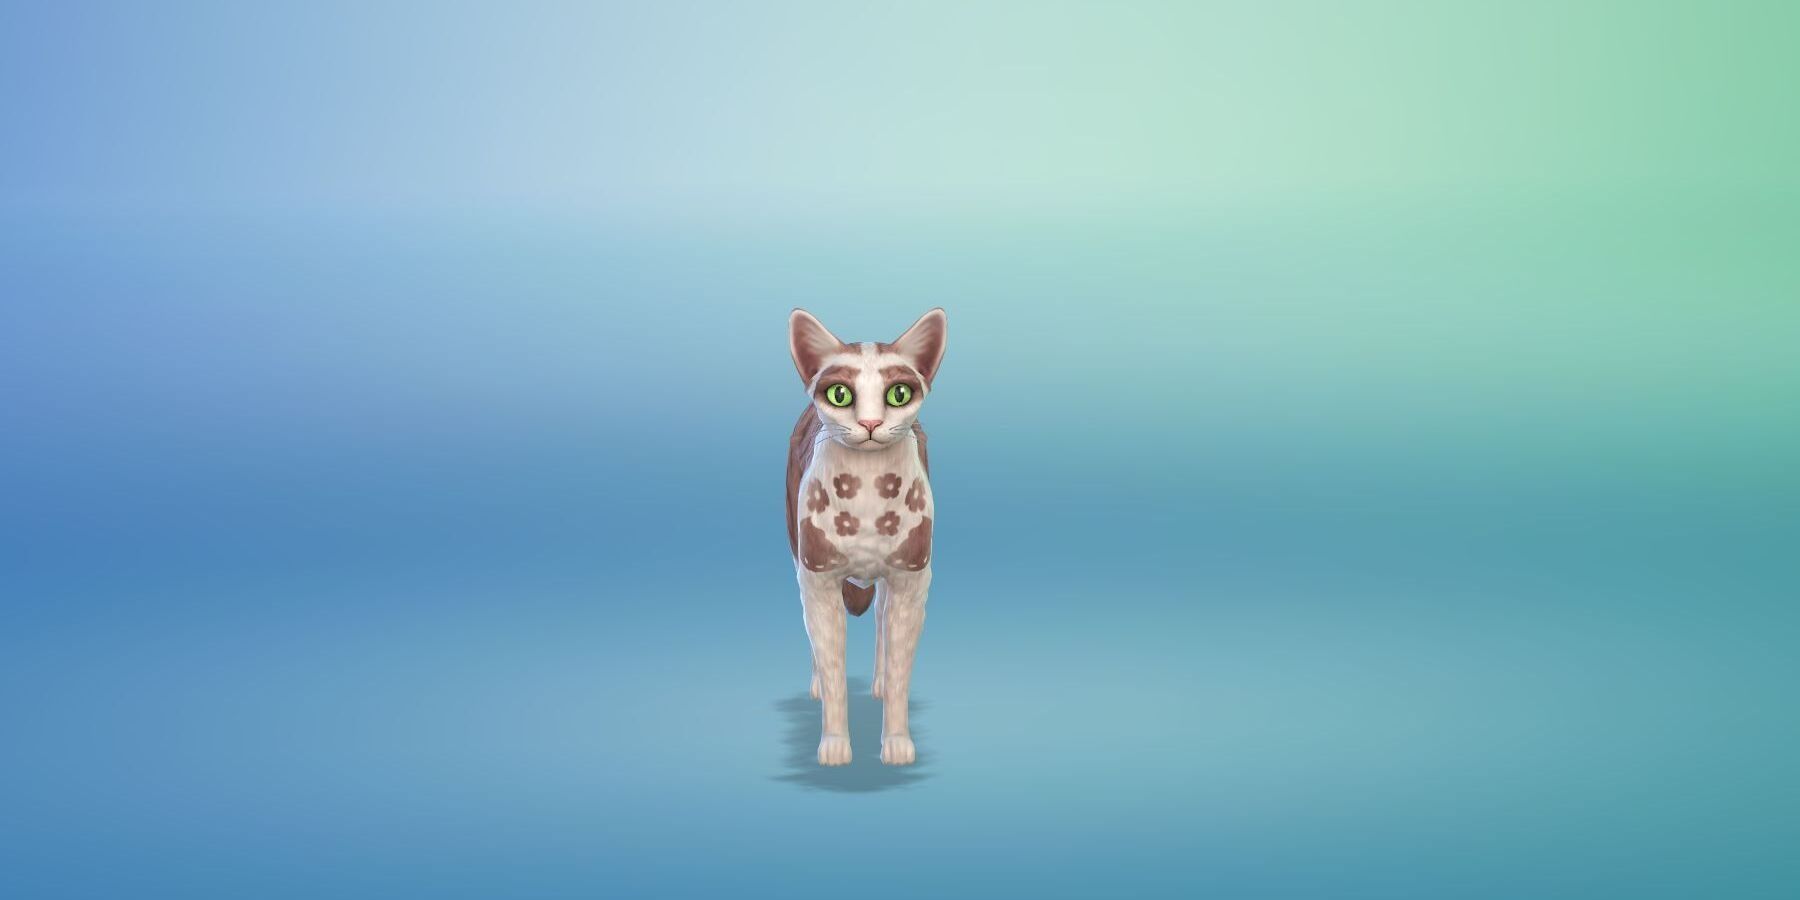 Sims 4 Player Accidentally Hires Cat As a Wedding Musician